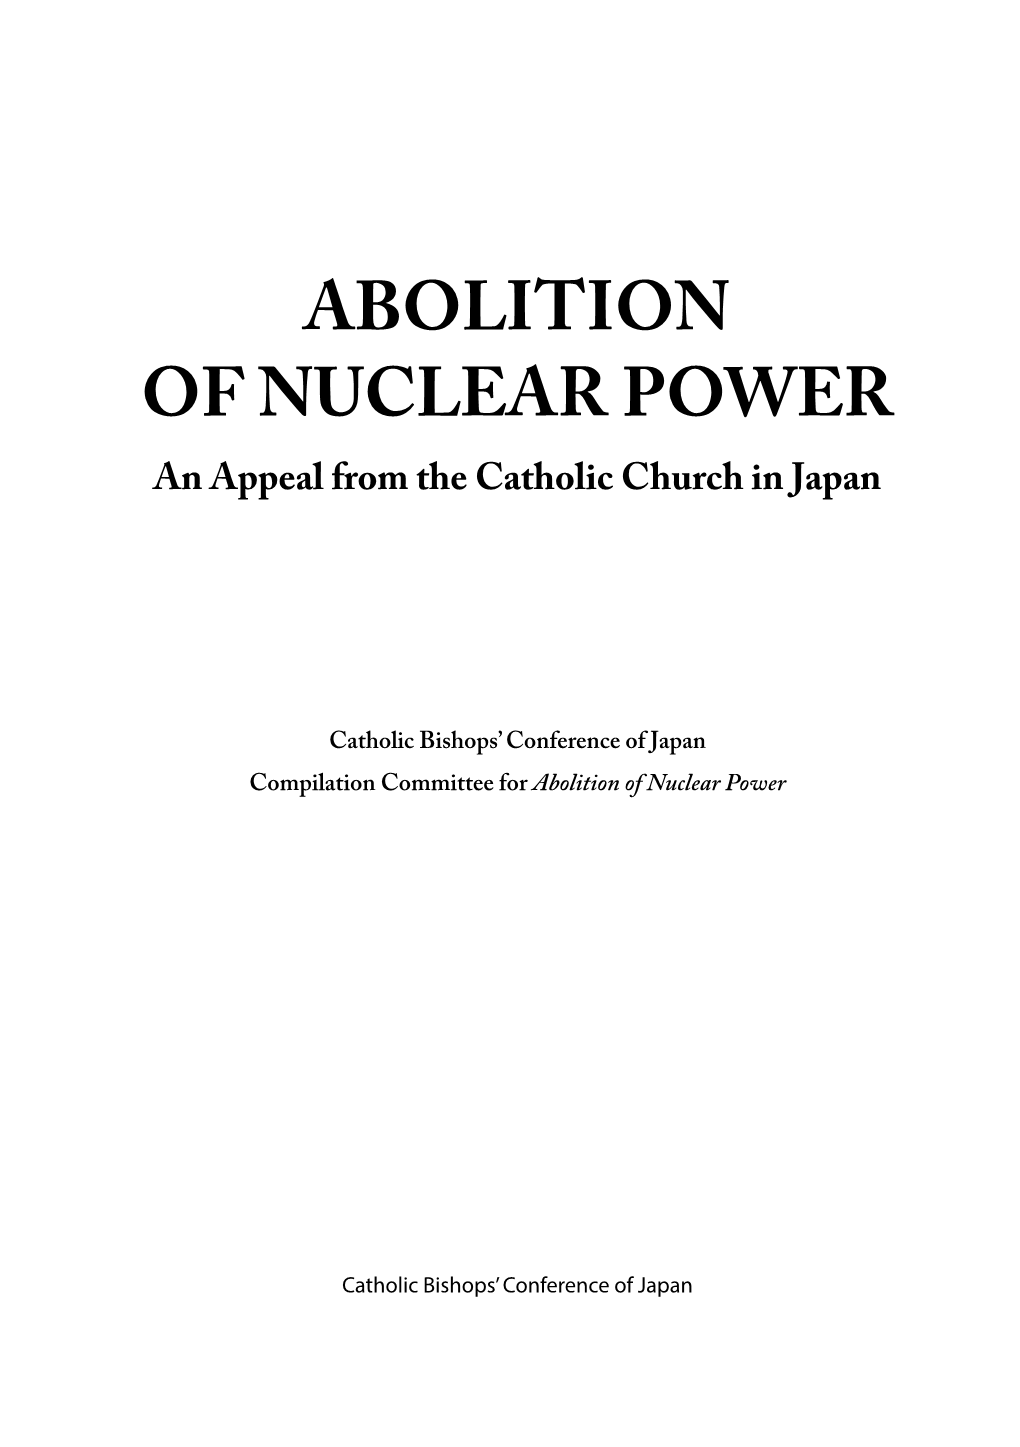 ABOLITION of NUCLEAR POWER an Appeal from the Catholic Church in Japan